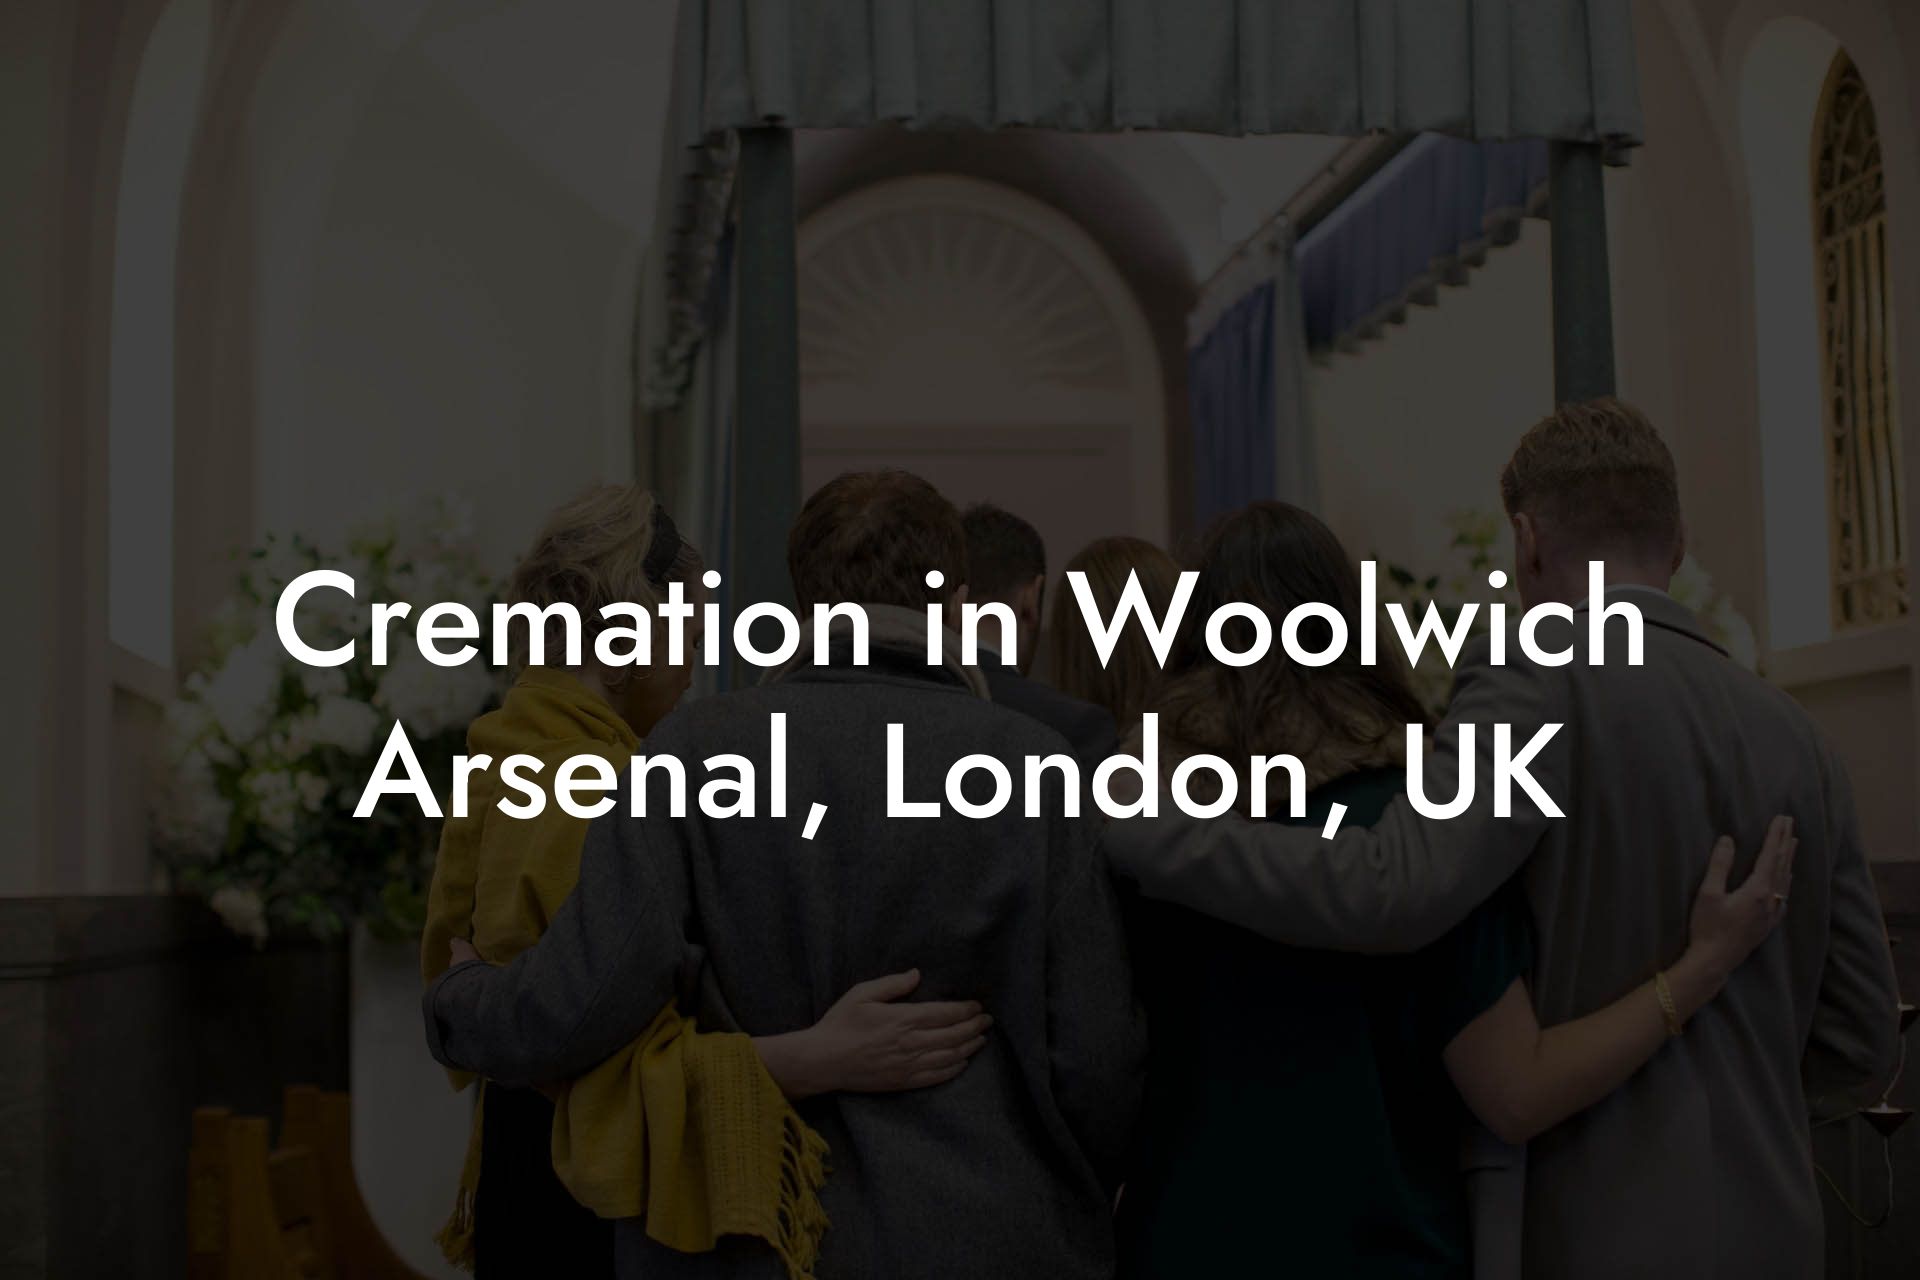 Cremation in Woolwich Arsenal, London, UK